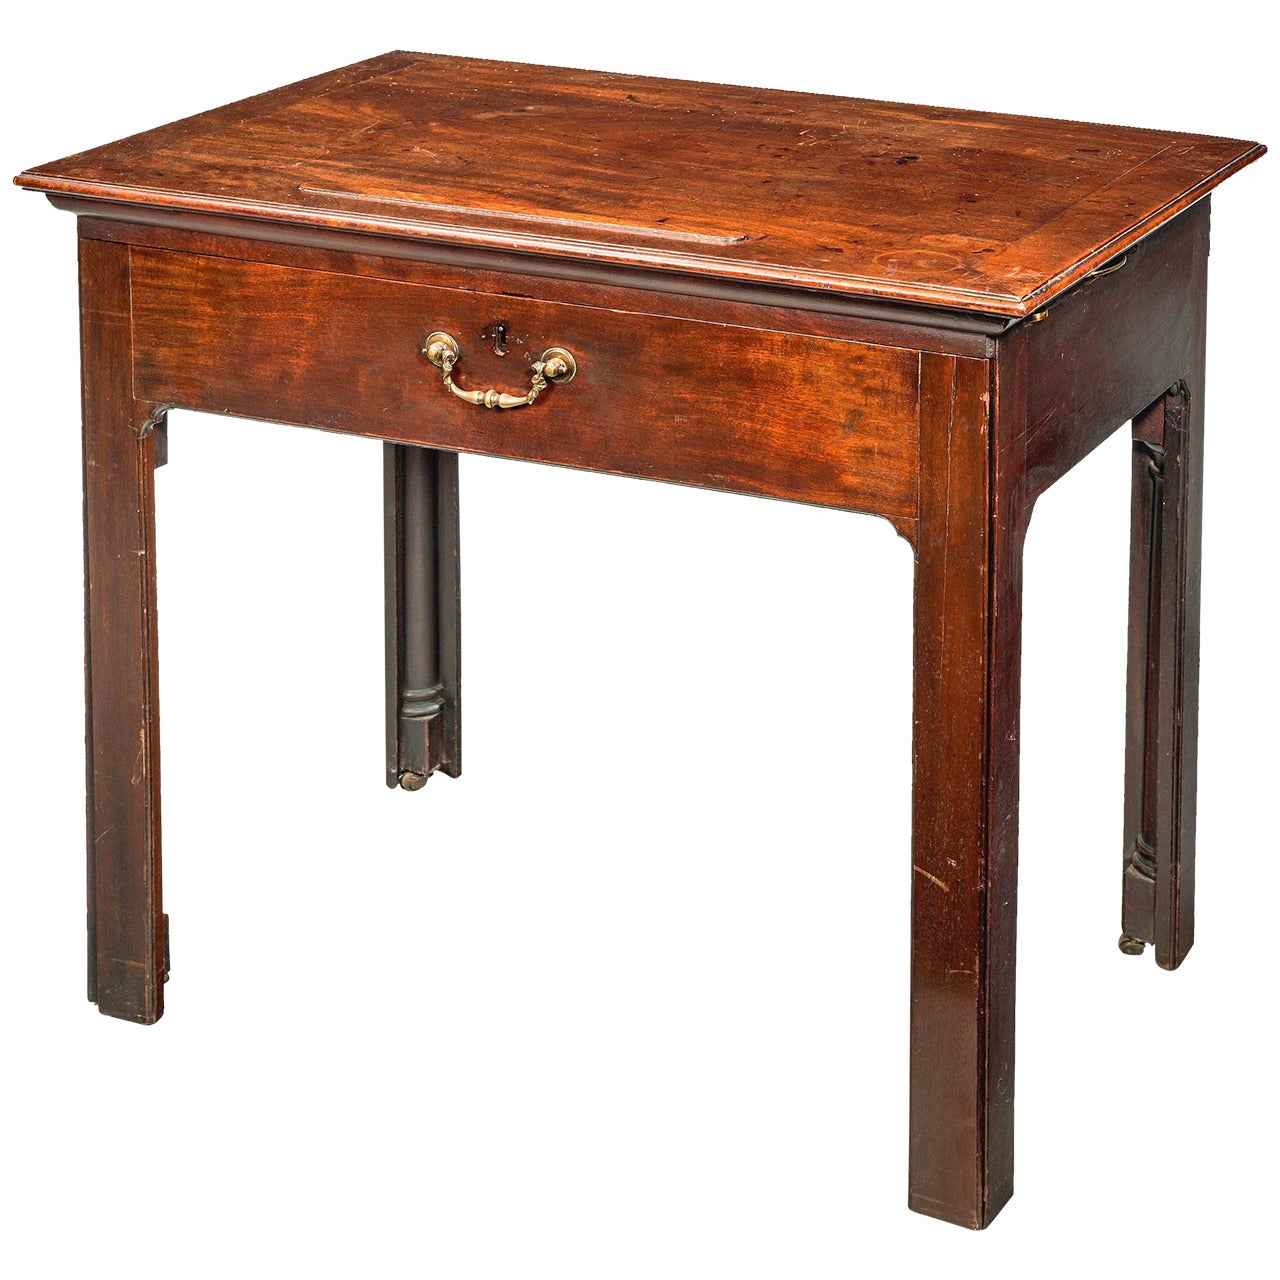 Chippendale Period Mahogany Architects Table